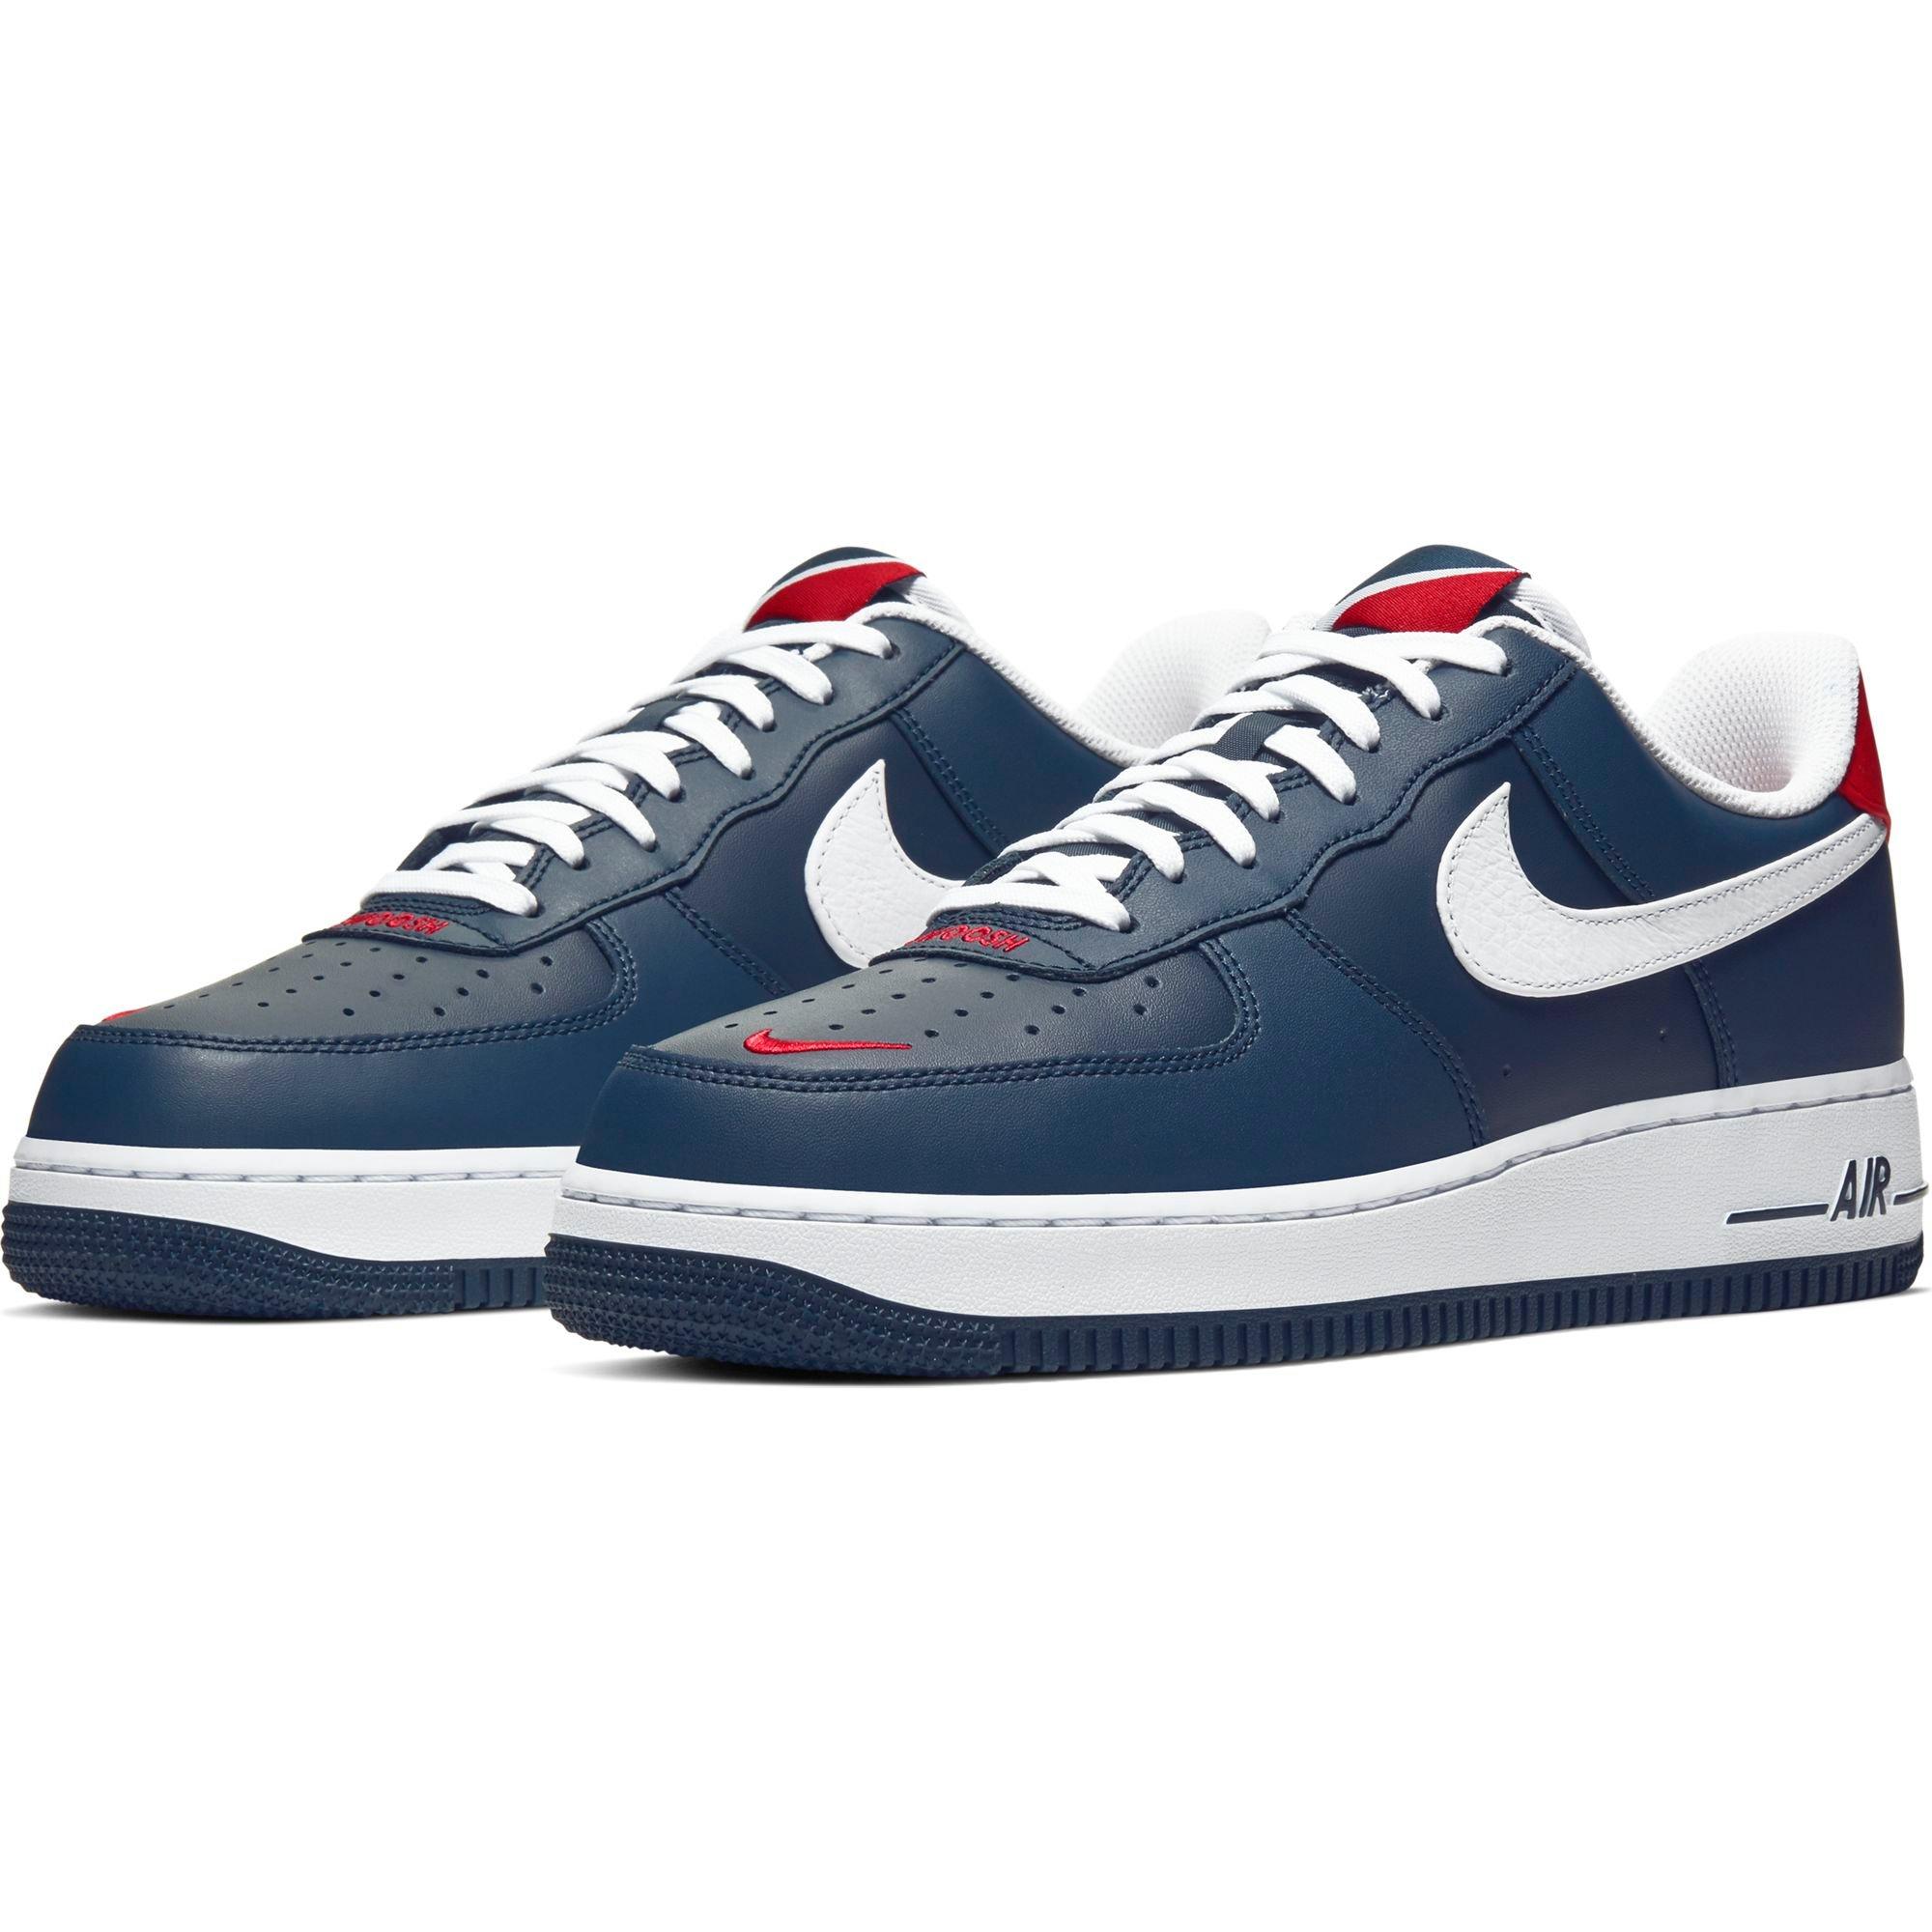 red and navy blue air forces